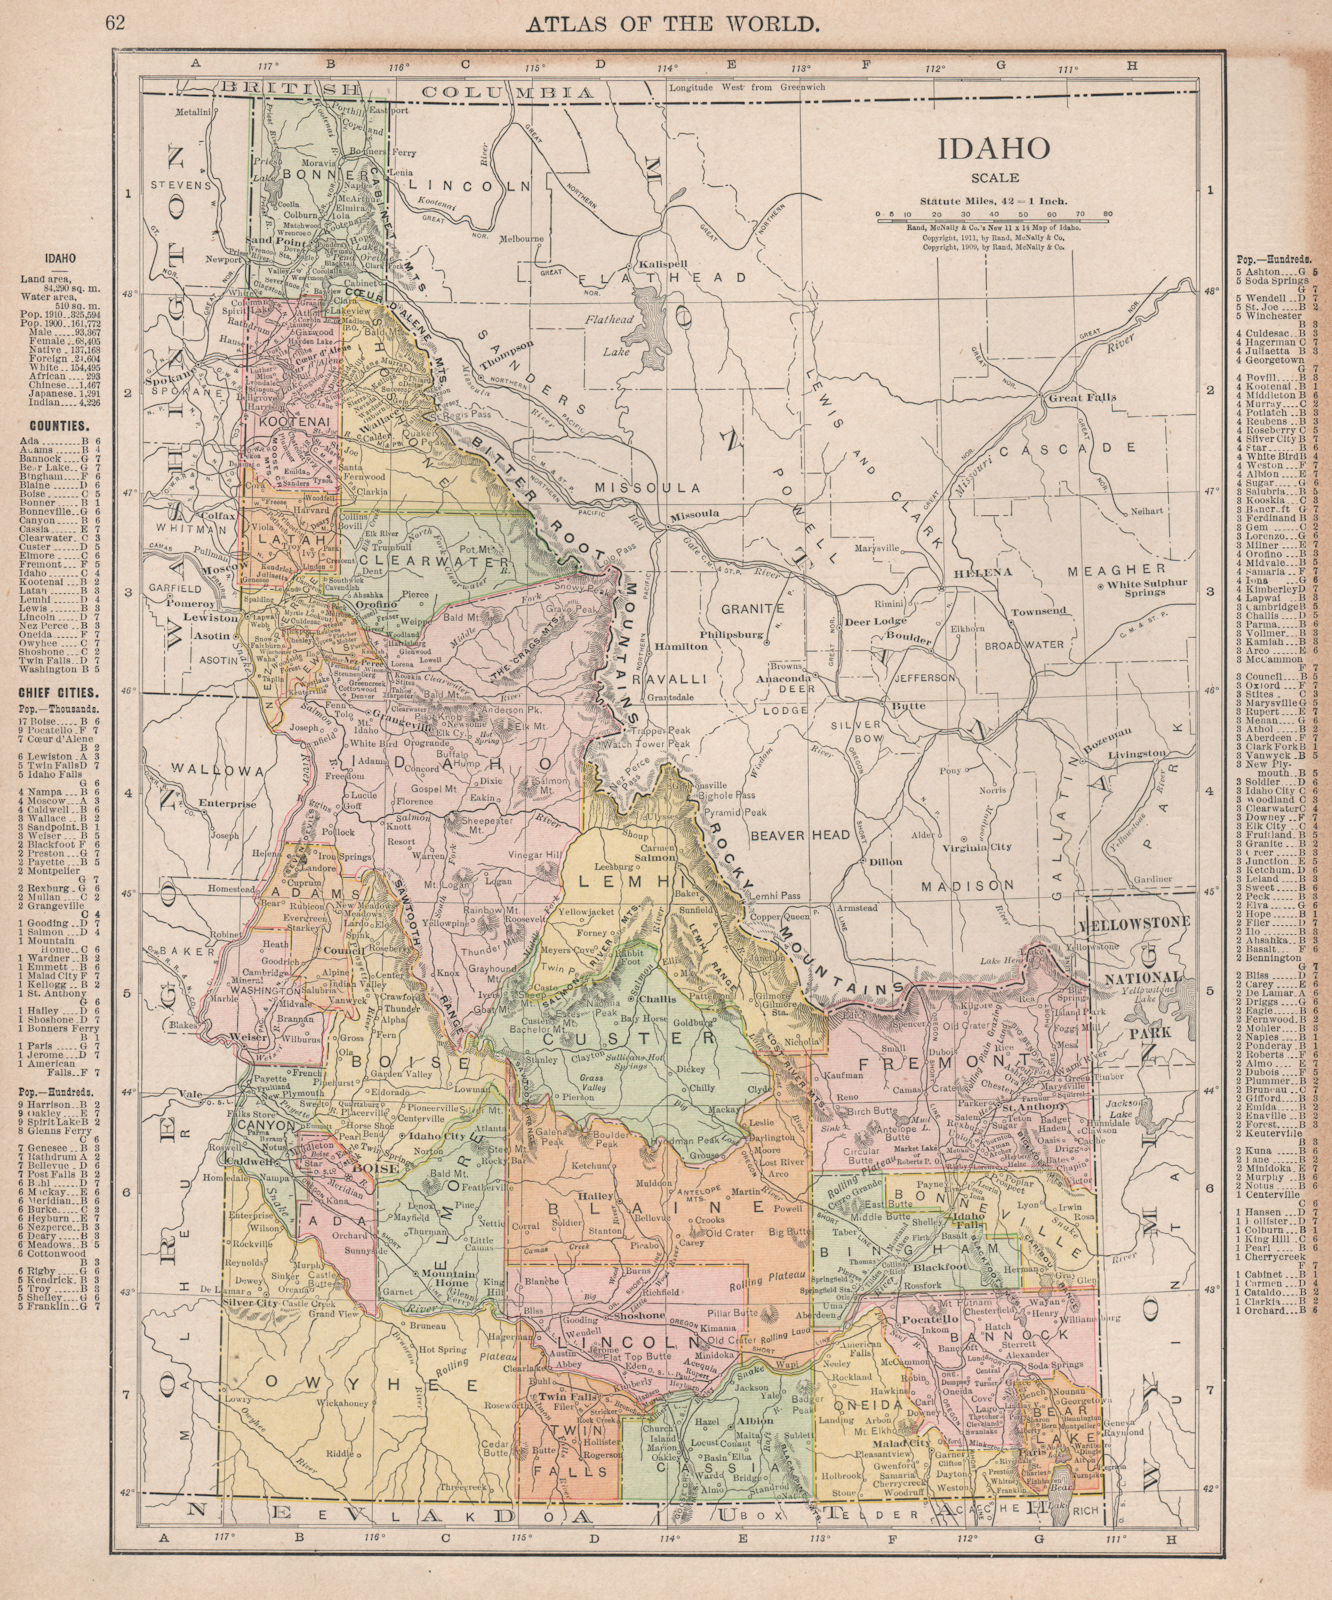 Associate Product Idaho state map showing counties. RAND MCNALLY 1912 old antique plan chart